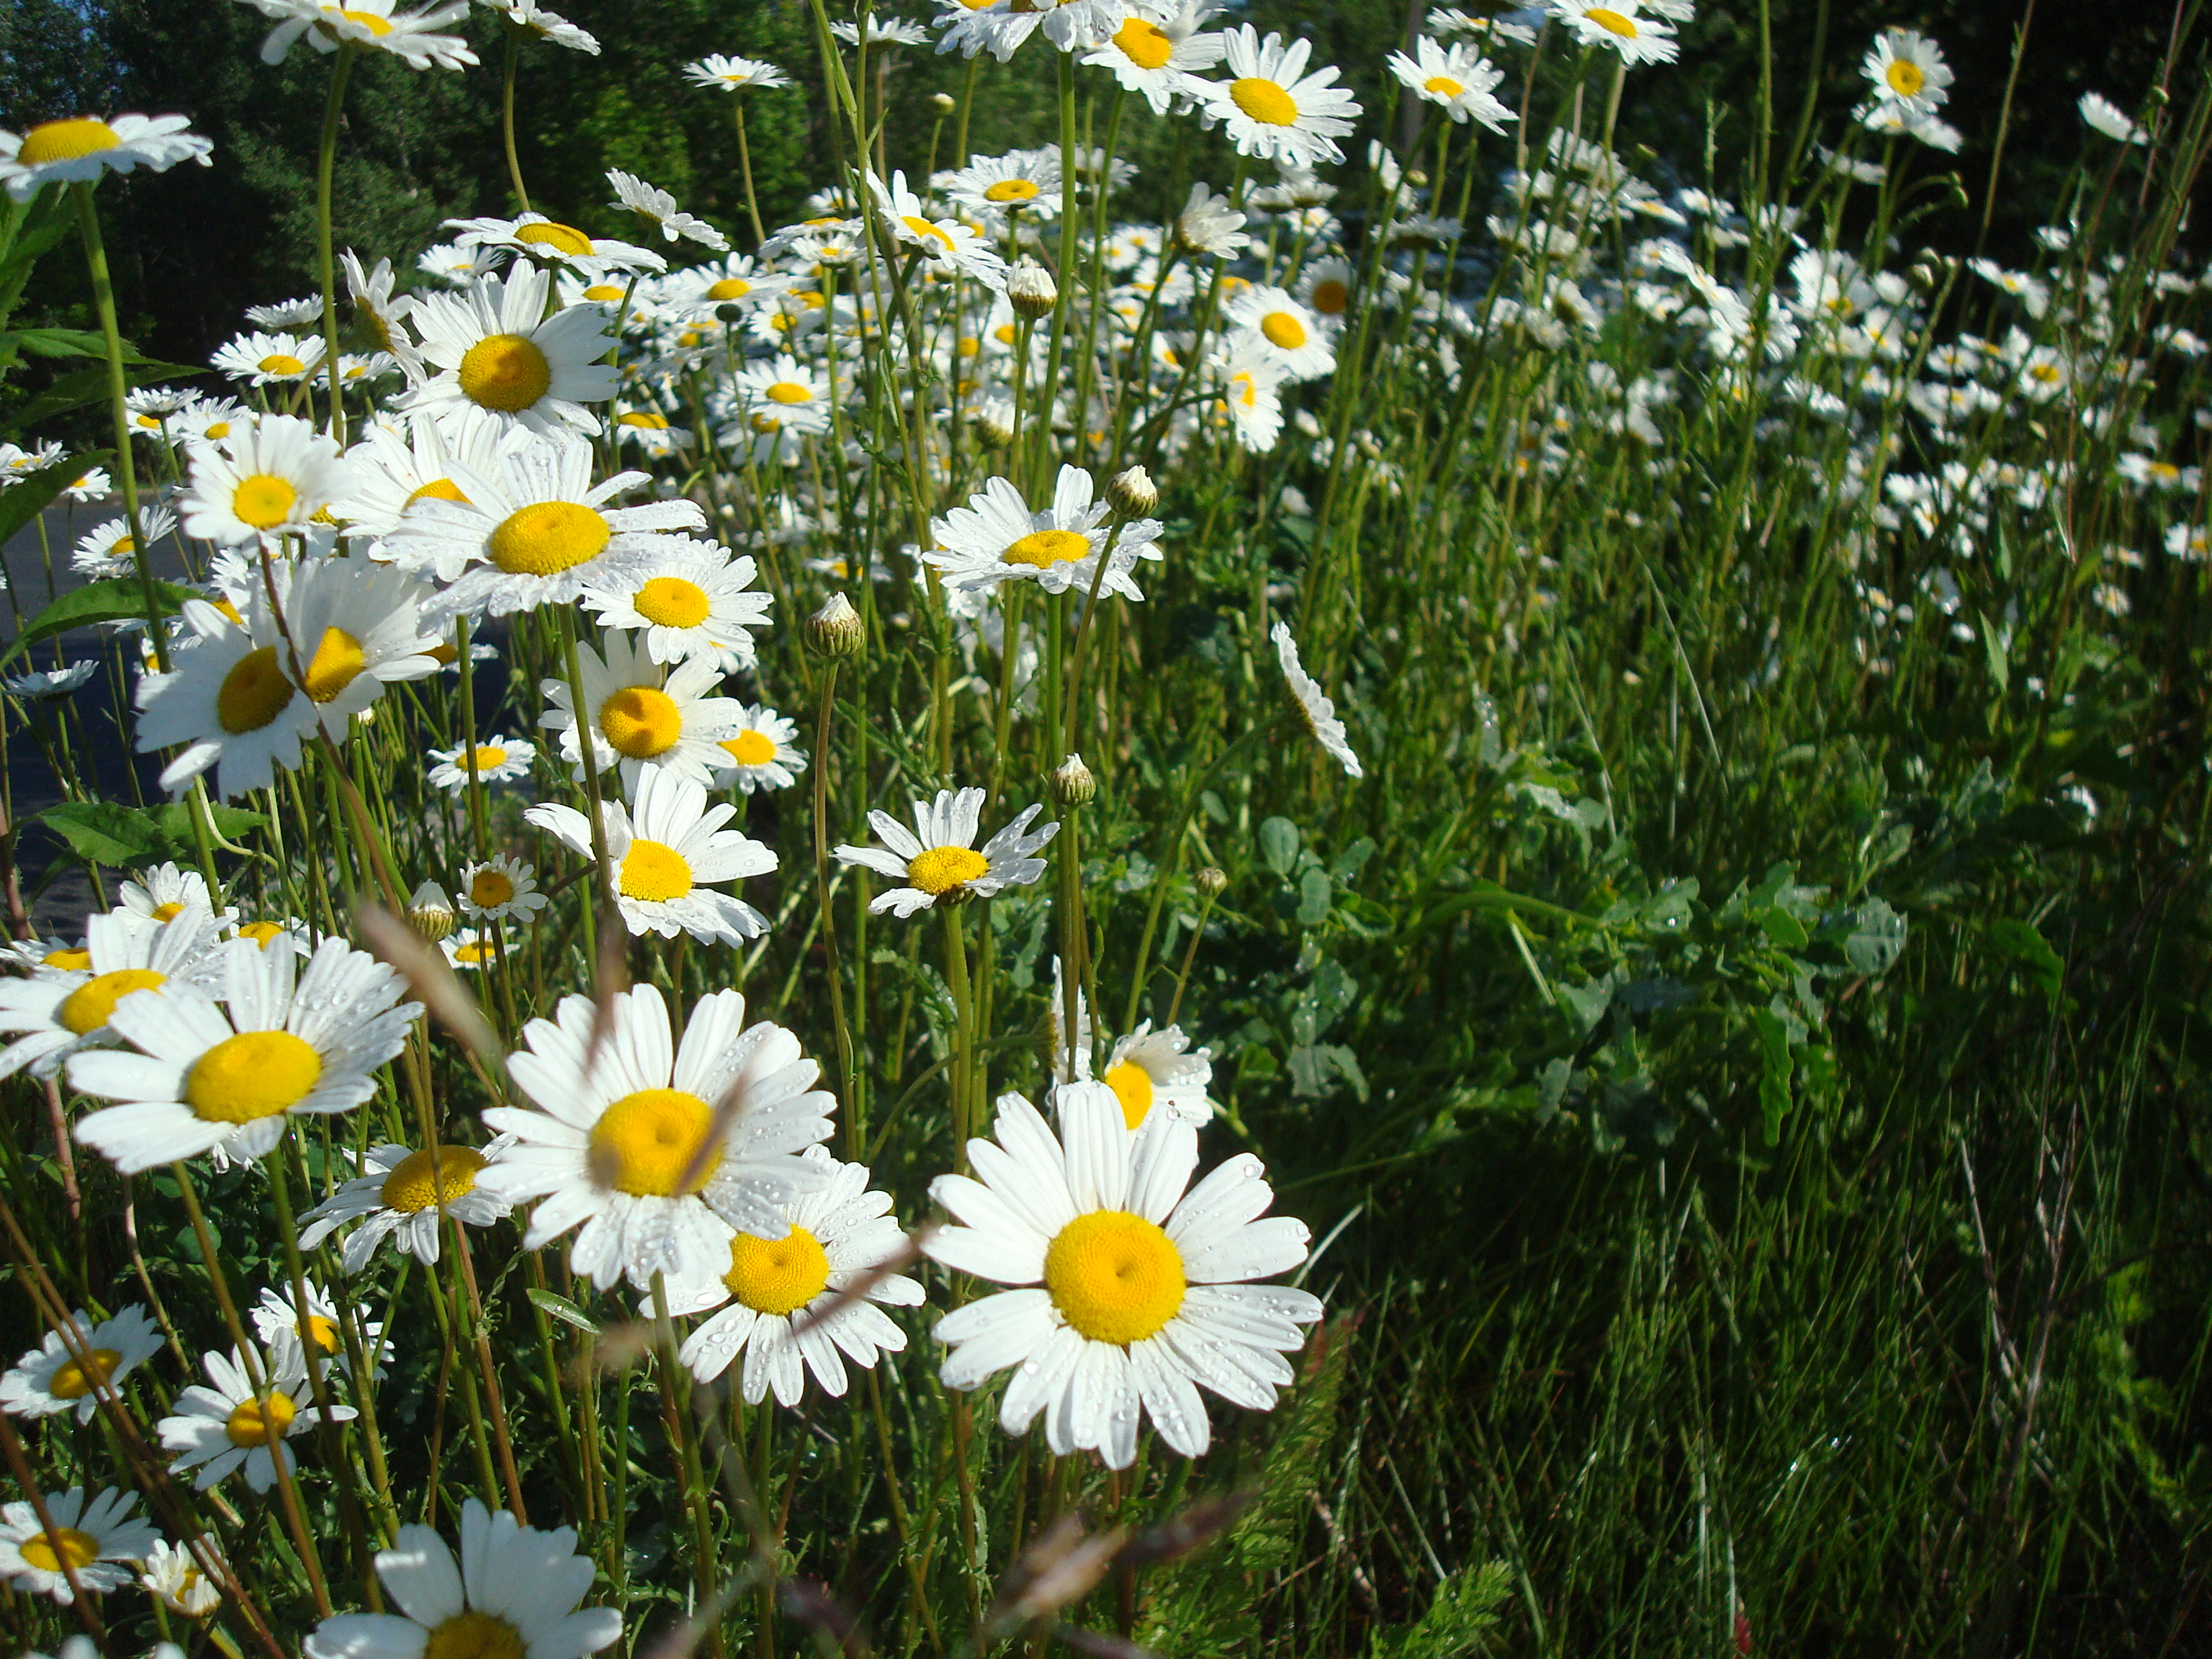 File:Bunch of daisies.JPG - Wikimedia Commons